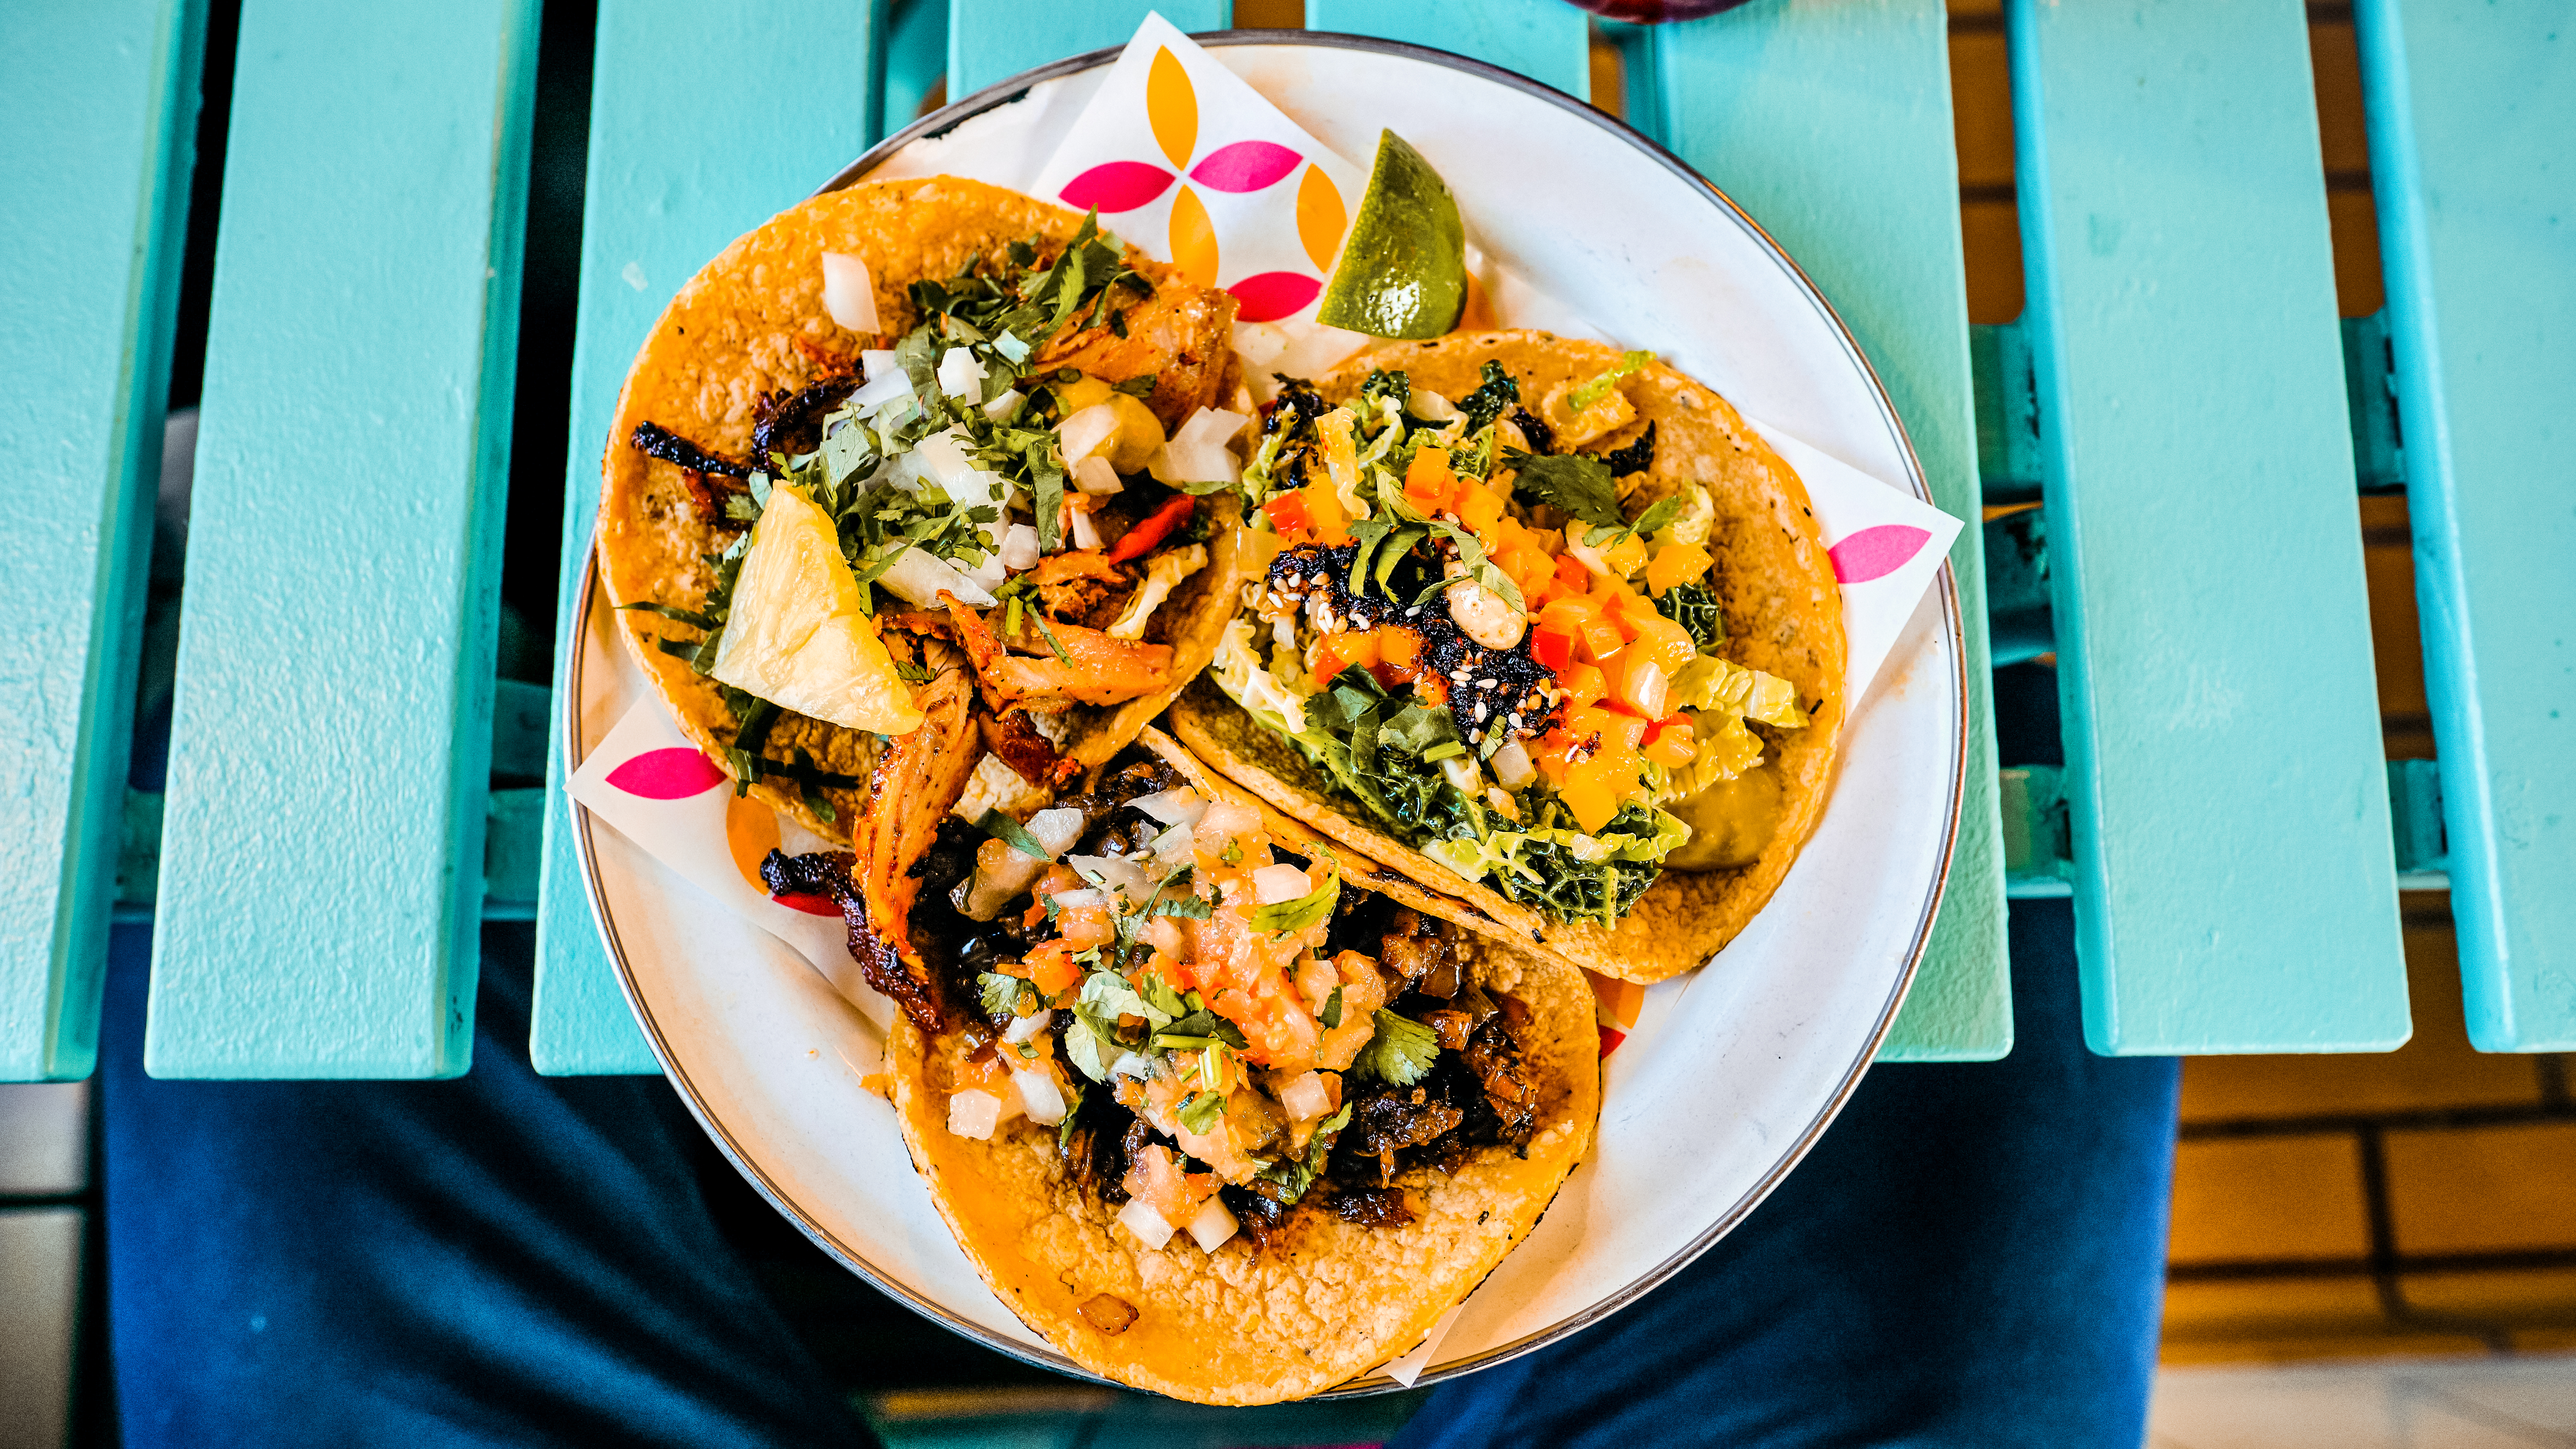 Delivering fast service is easy when you are staffed up with Hospitality Pros from Gigpro that can help keep the kitchen flowing and dishing out delicious tacos.  